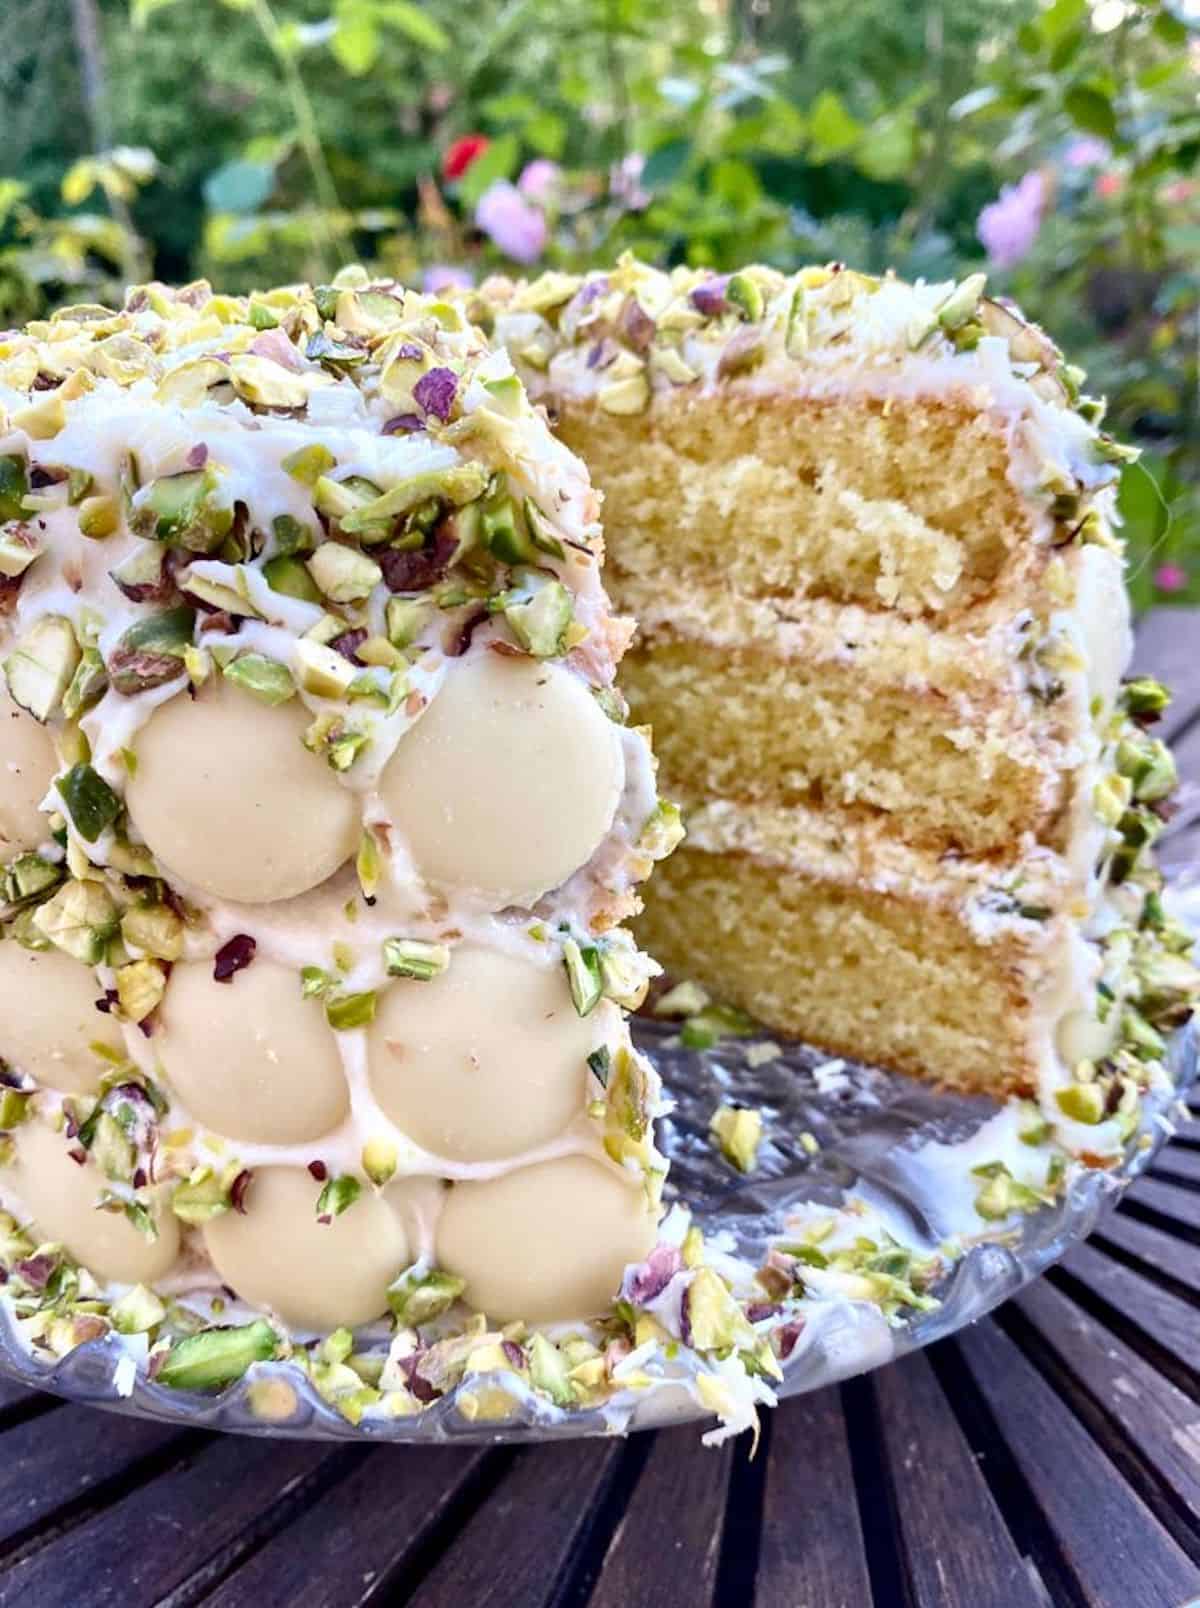 a slice of white chocolate and pistachio cake